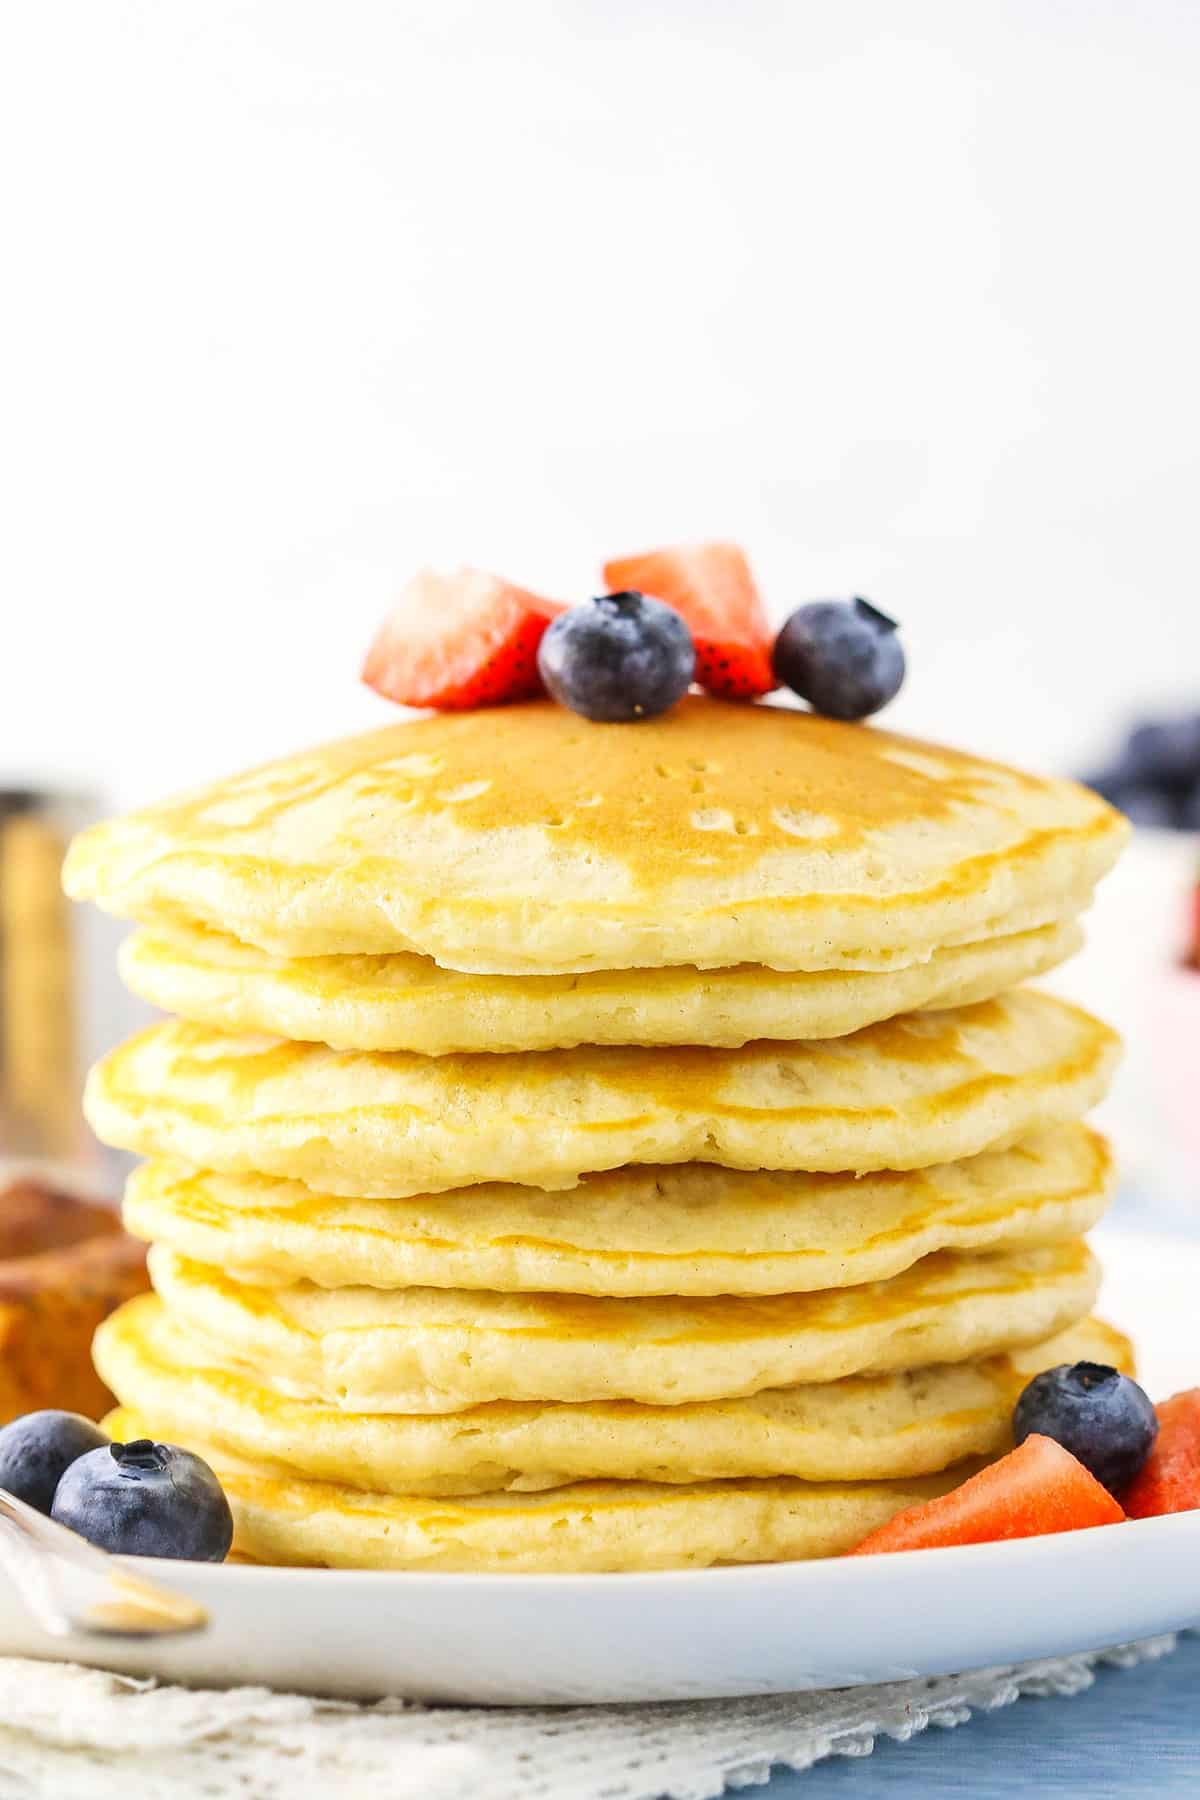 Side view of seven Fluffy Homemade Pancakes stacked on a white plate and topped with cut strawberries and blueberries